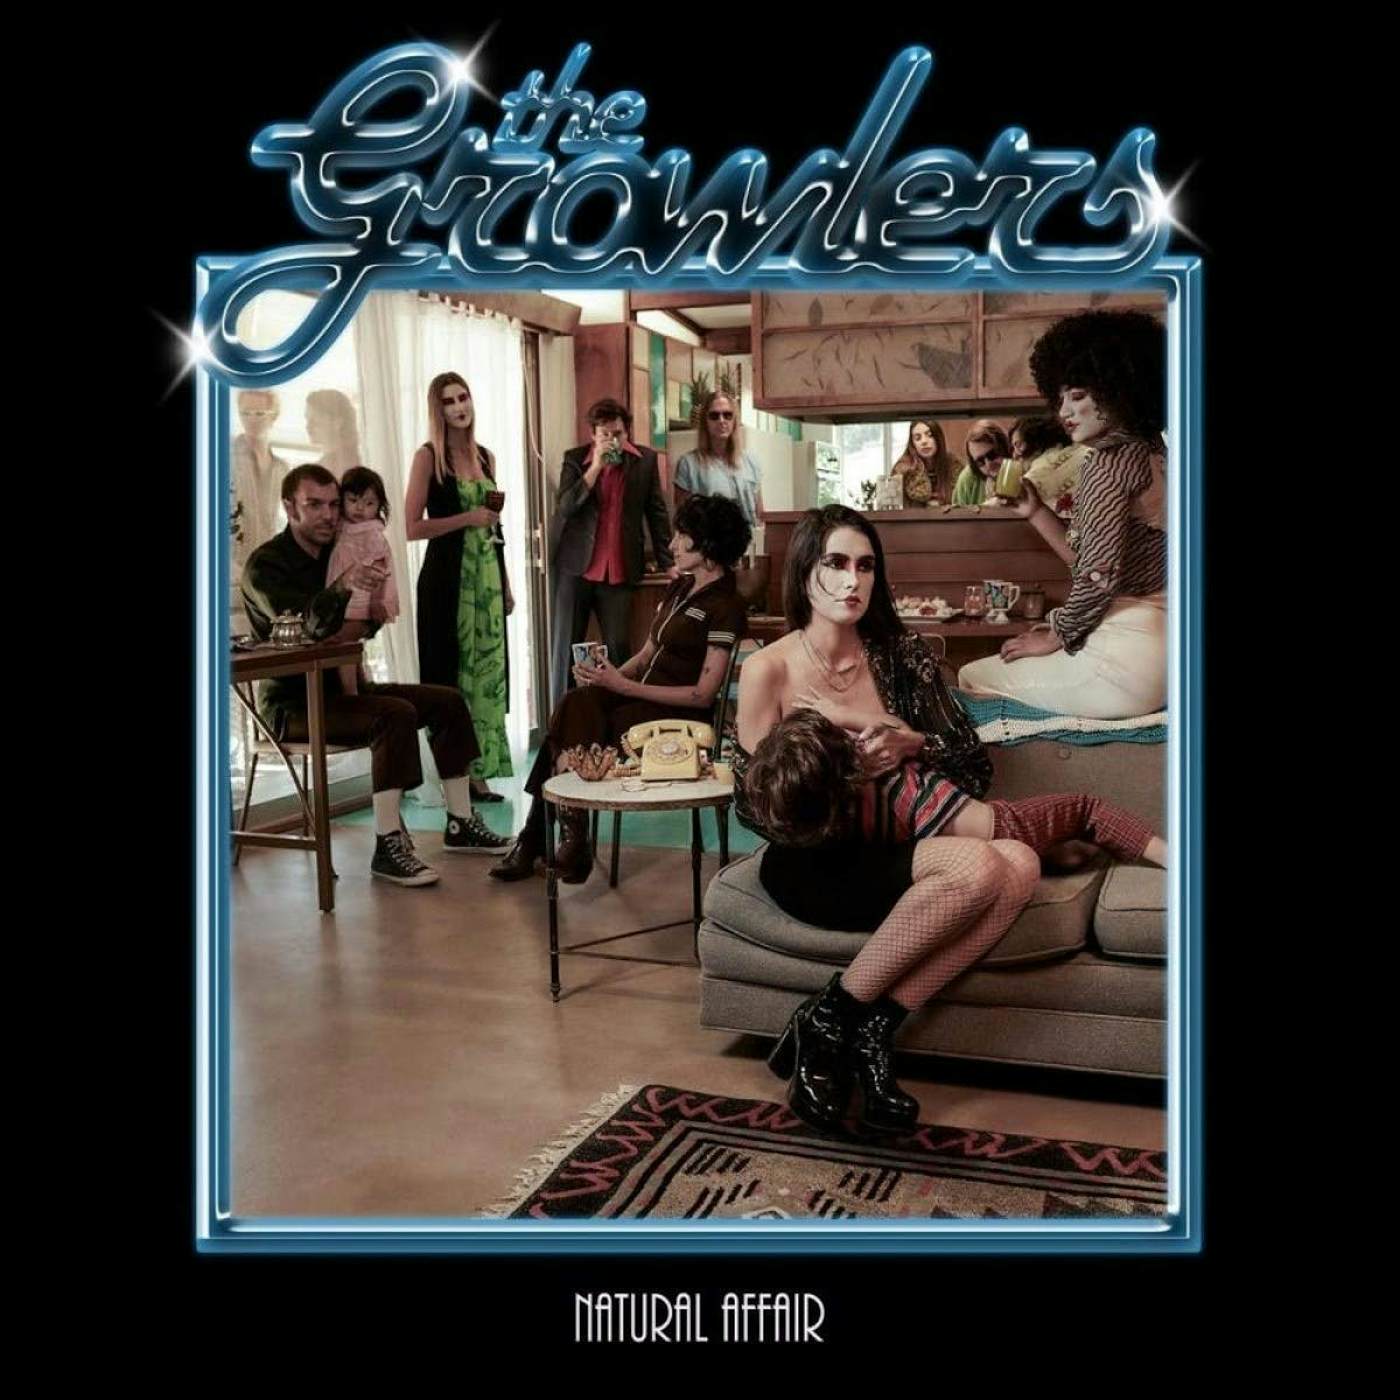 The Growlers NATURAL AFFAIR CD